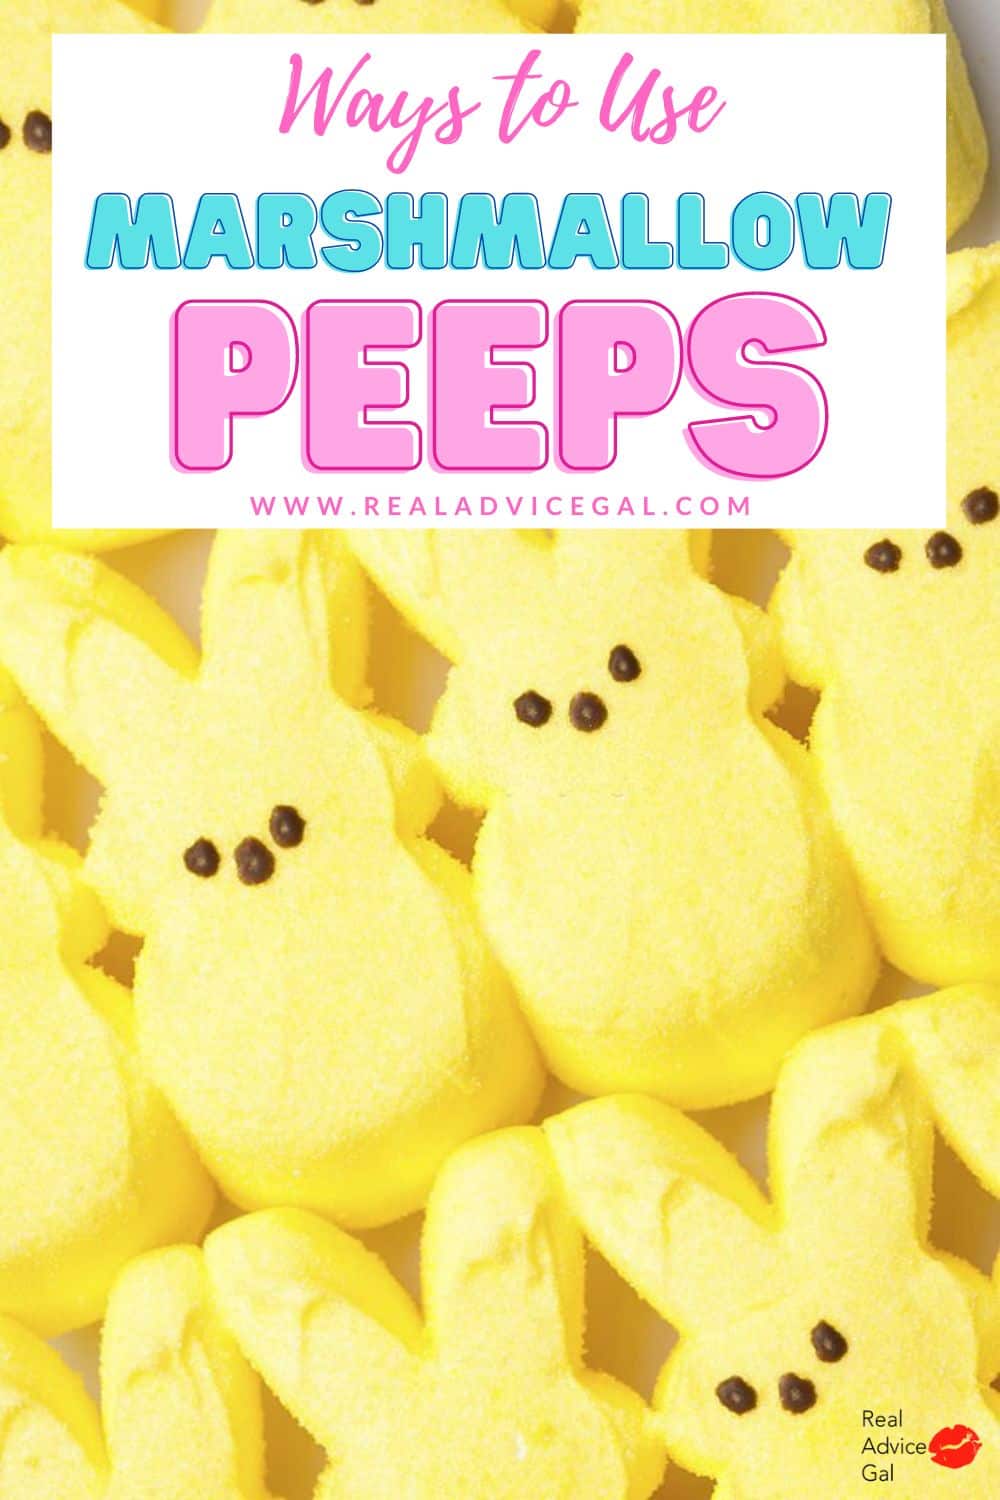 Ways to use Easter peeps